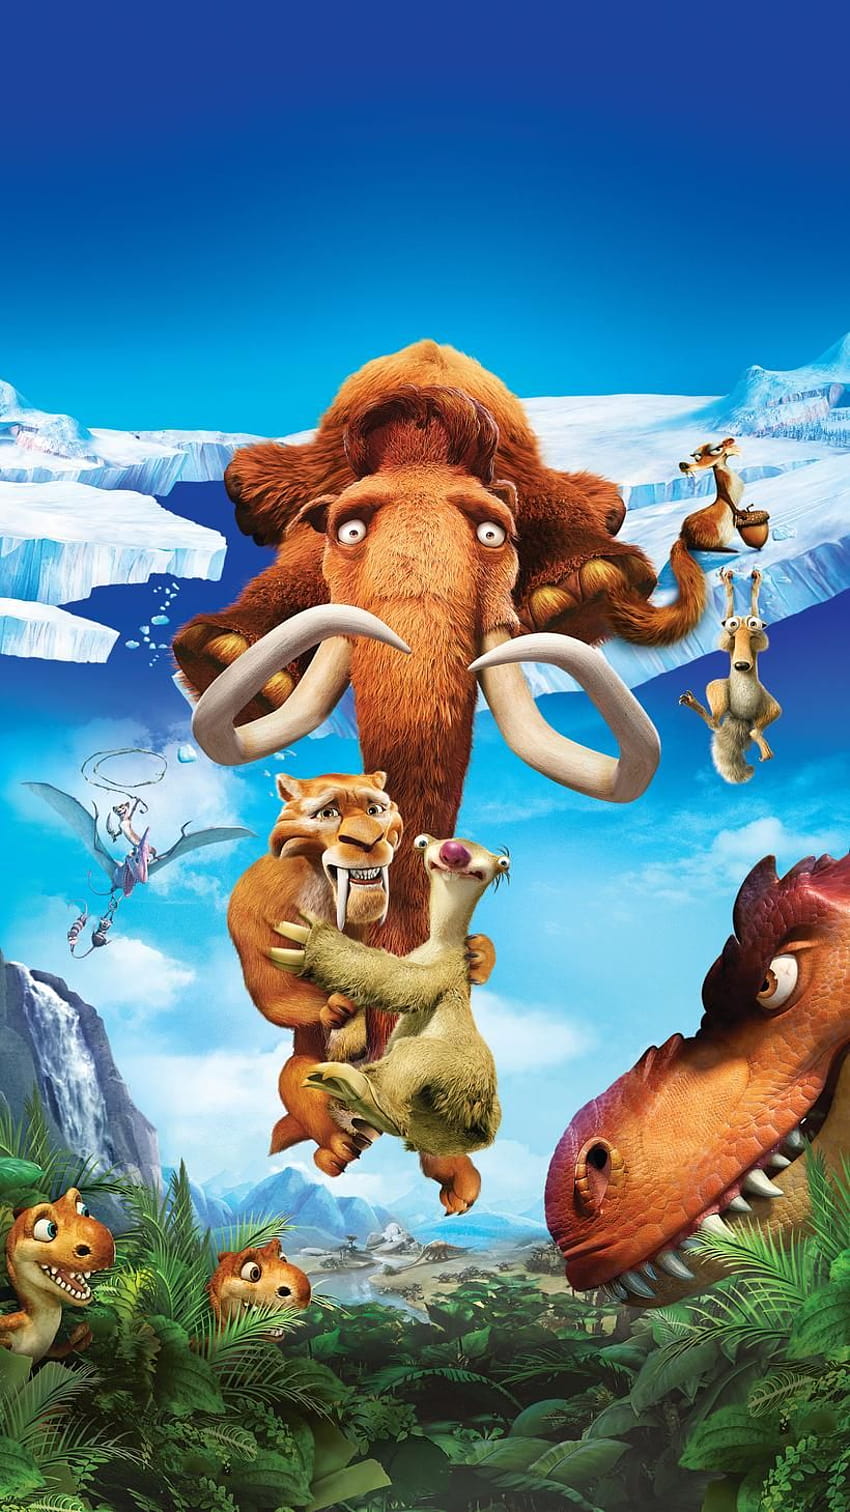 for, ice age dawn of the dinosaurs HD phone wallpaper